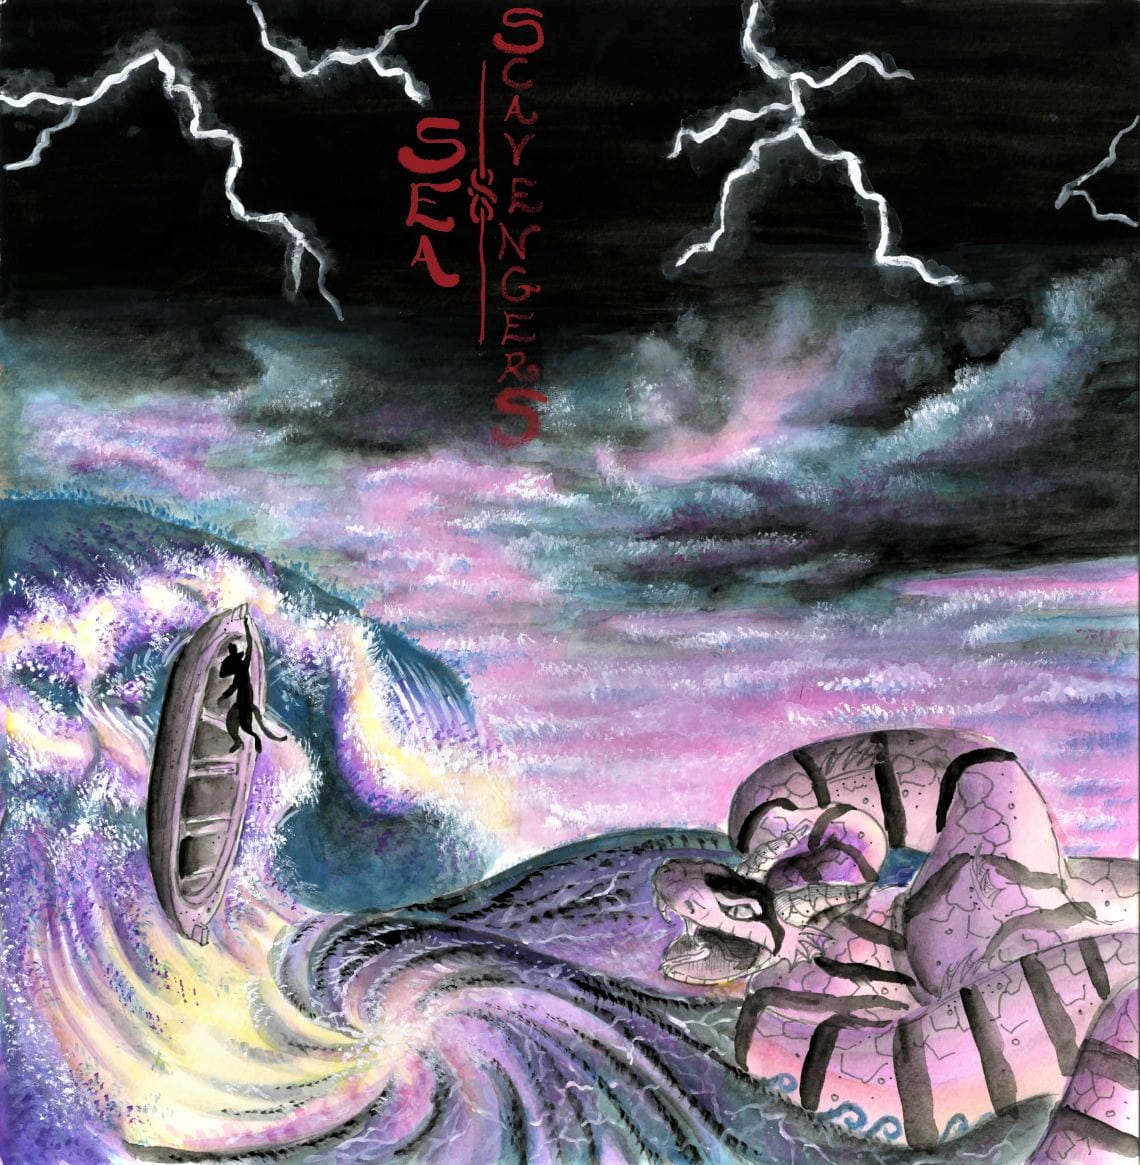 Illustration of a capsizing boat in a storm next to a giant striped snake.